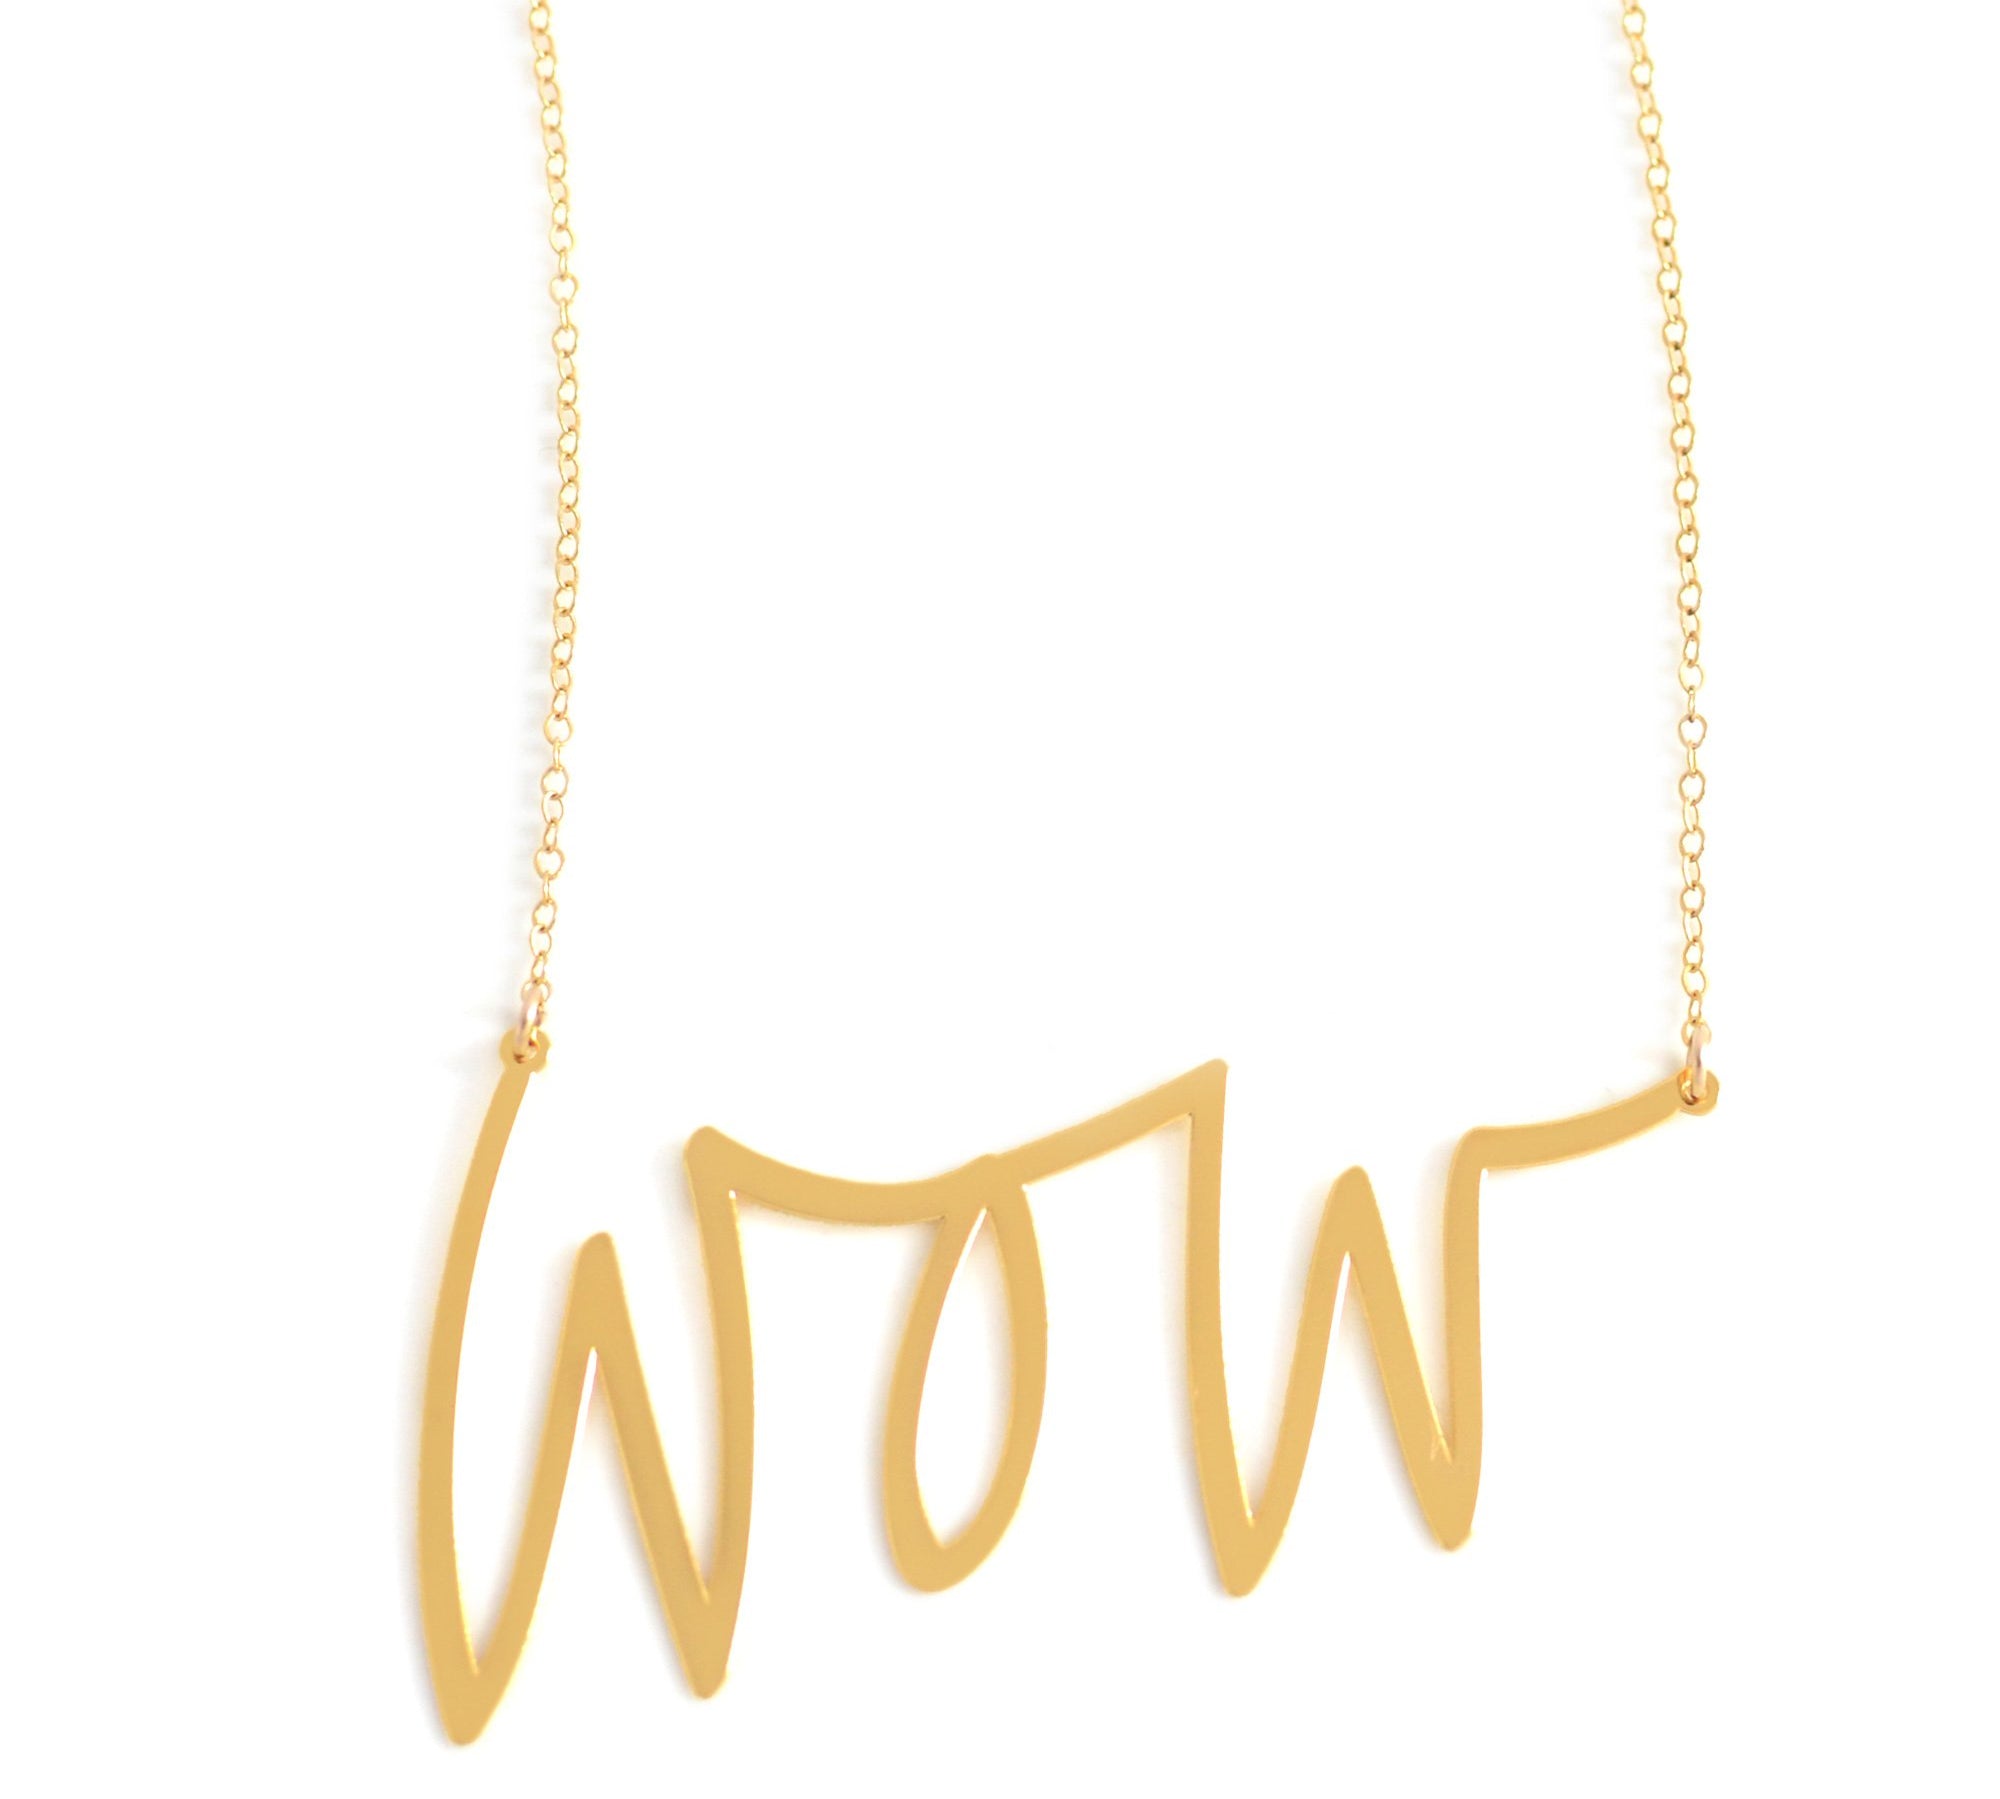 Wow Necklace - High Quality, Affordable, Hand Written, Self Love, Mantra Word Necklace - Available in Gold and Silver - Small and Large Sizes - Made in USA - Brevity Jewelry